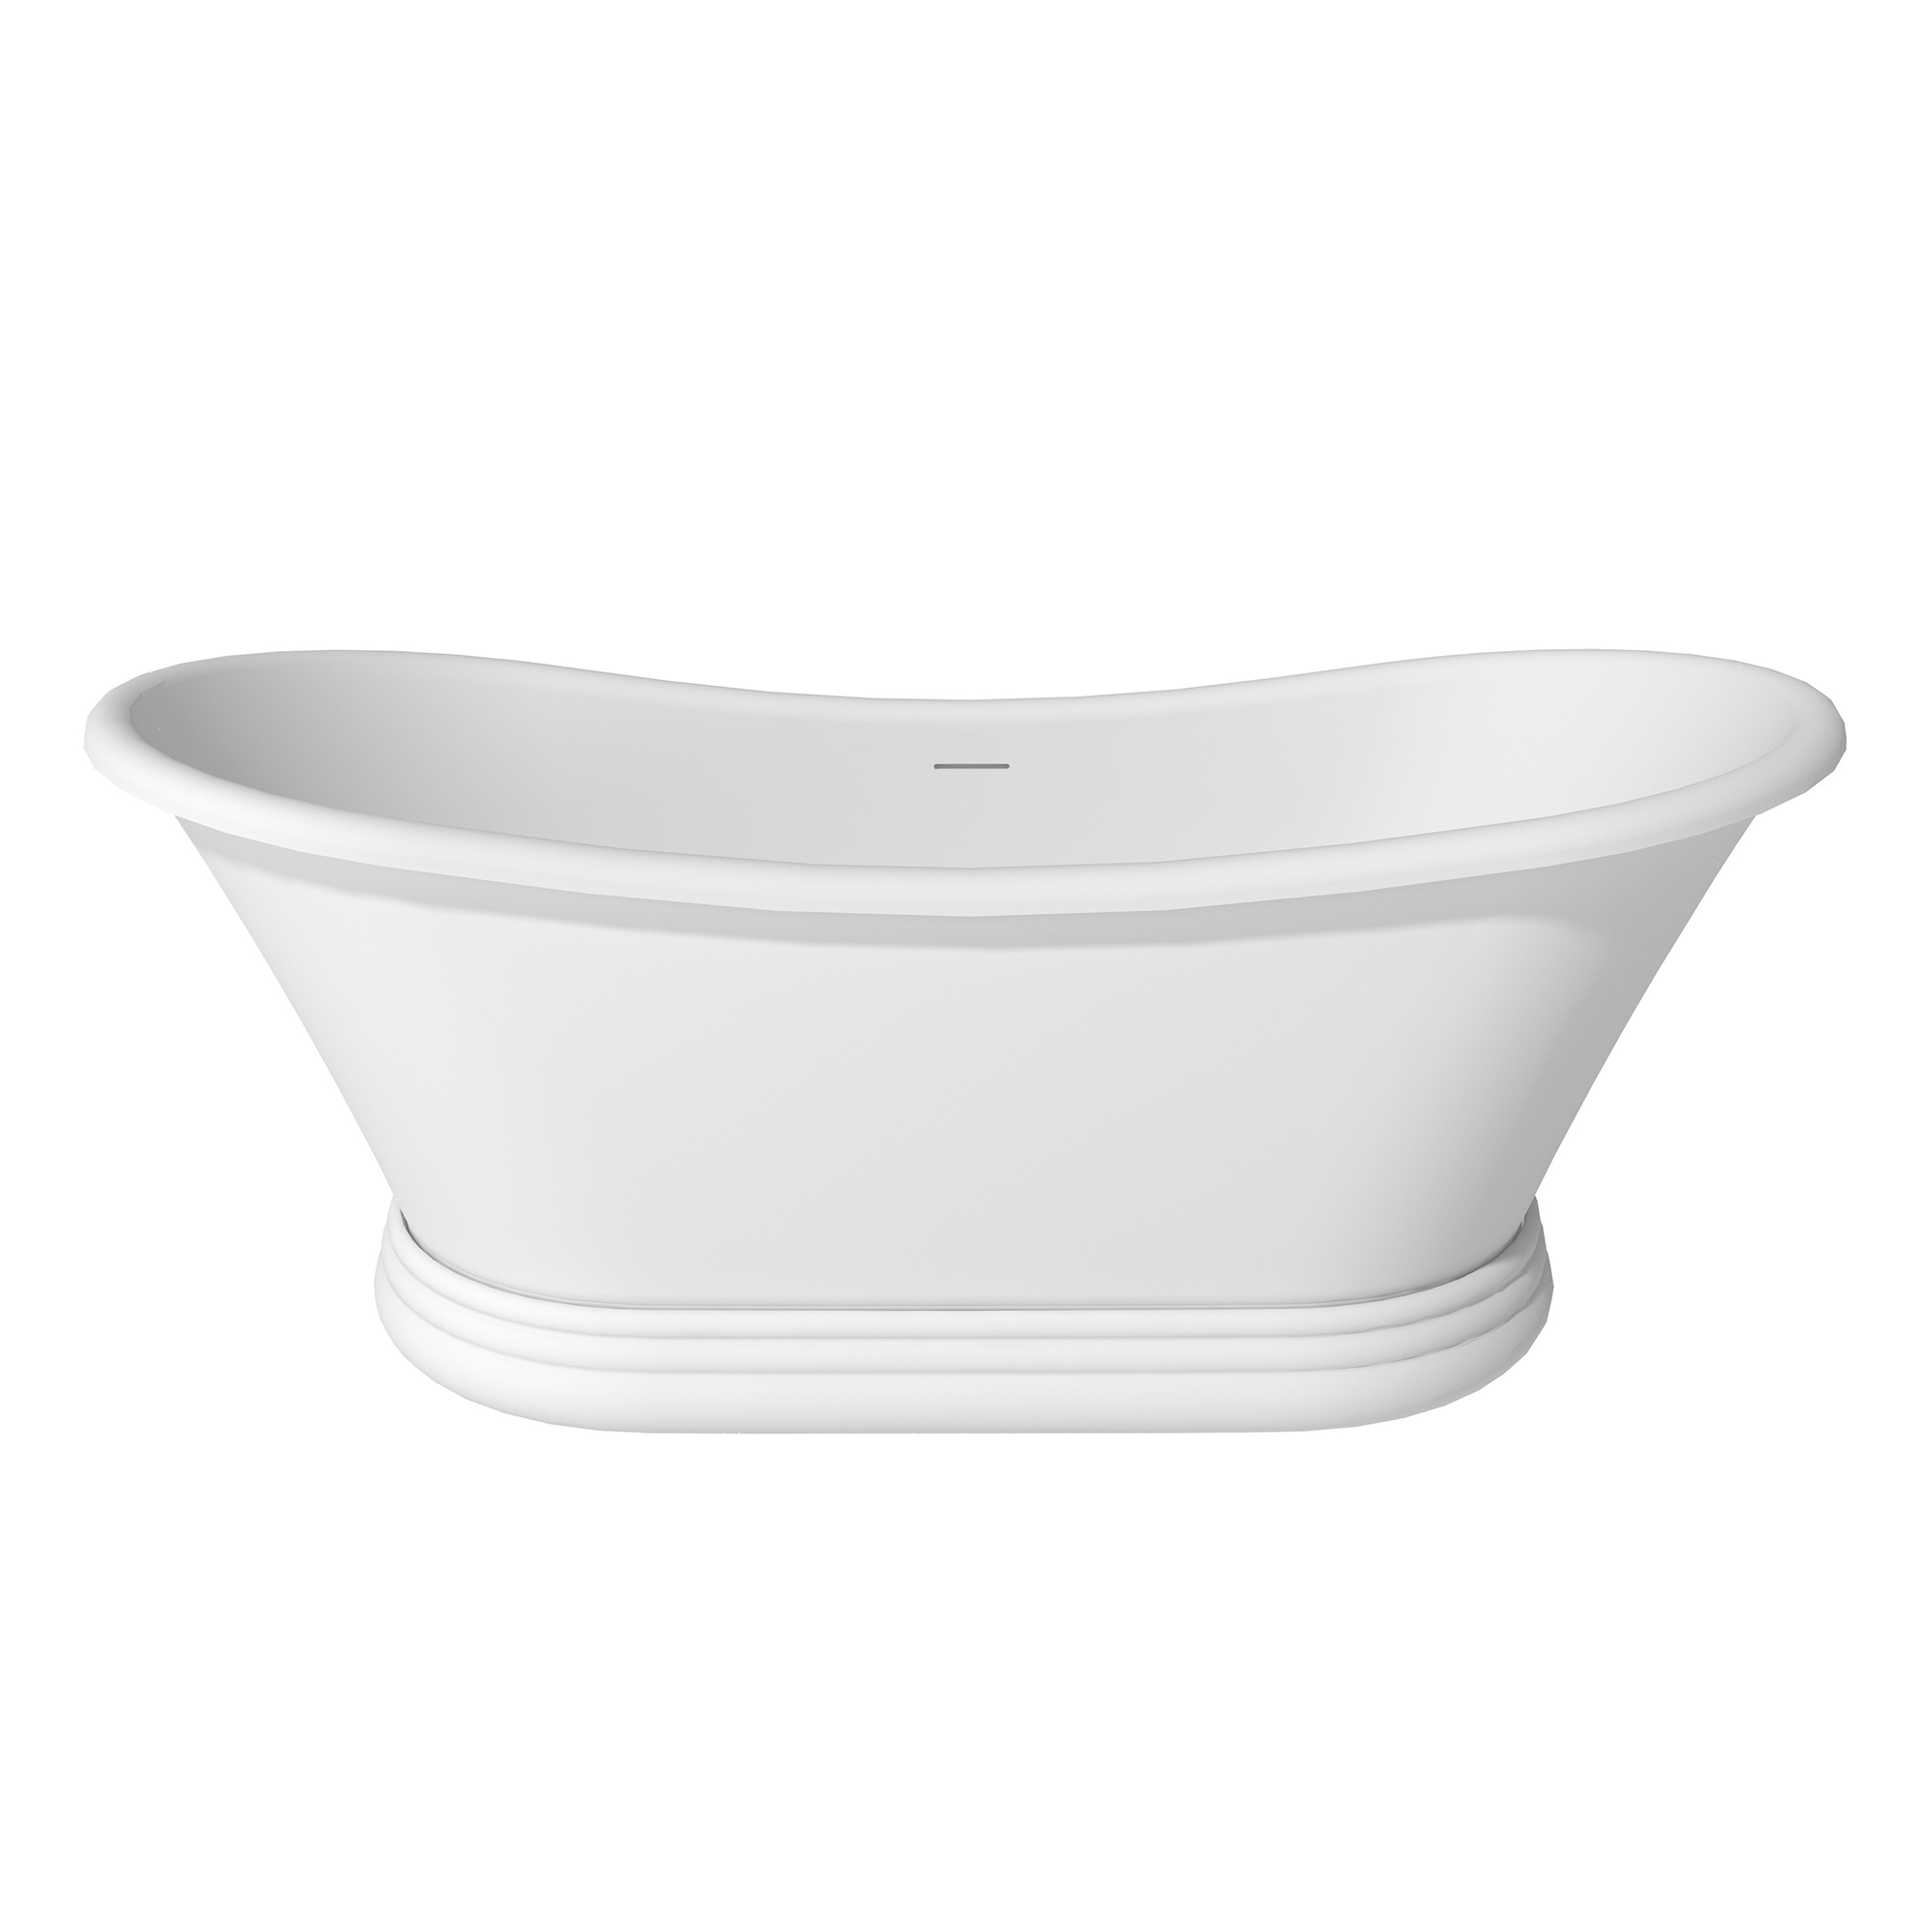 67" Freestanding Solid Surface Stone Bathtub - Matte White Finish, Center Drain, cUPc Certified, Double-Ended High-Back Design(With/without Tub Faucet)